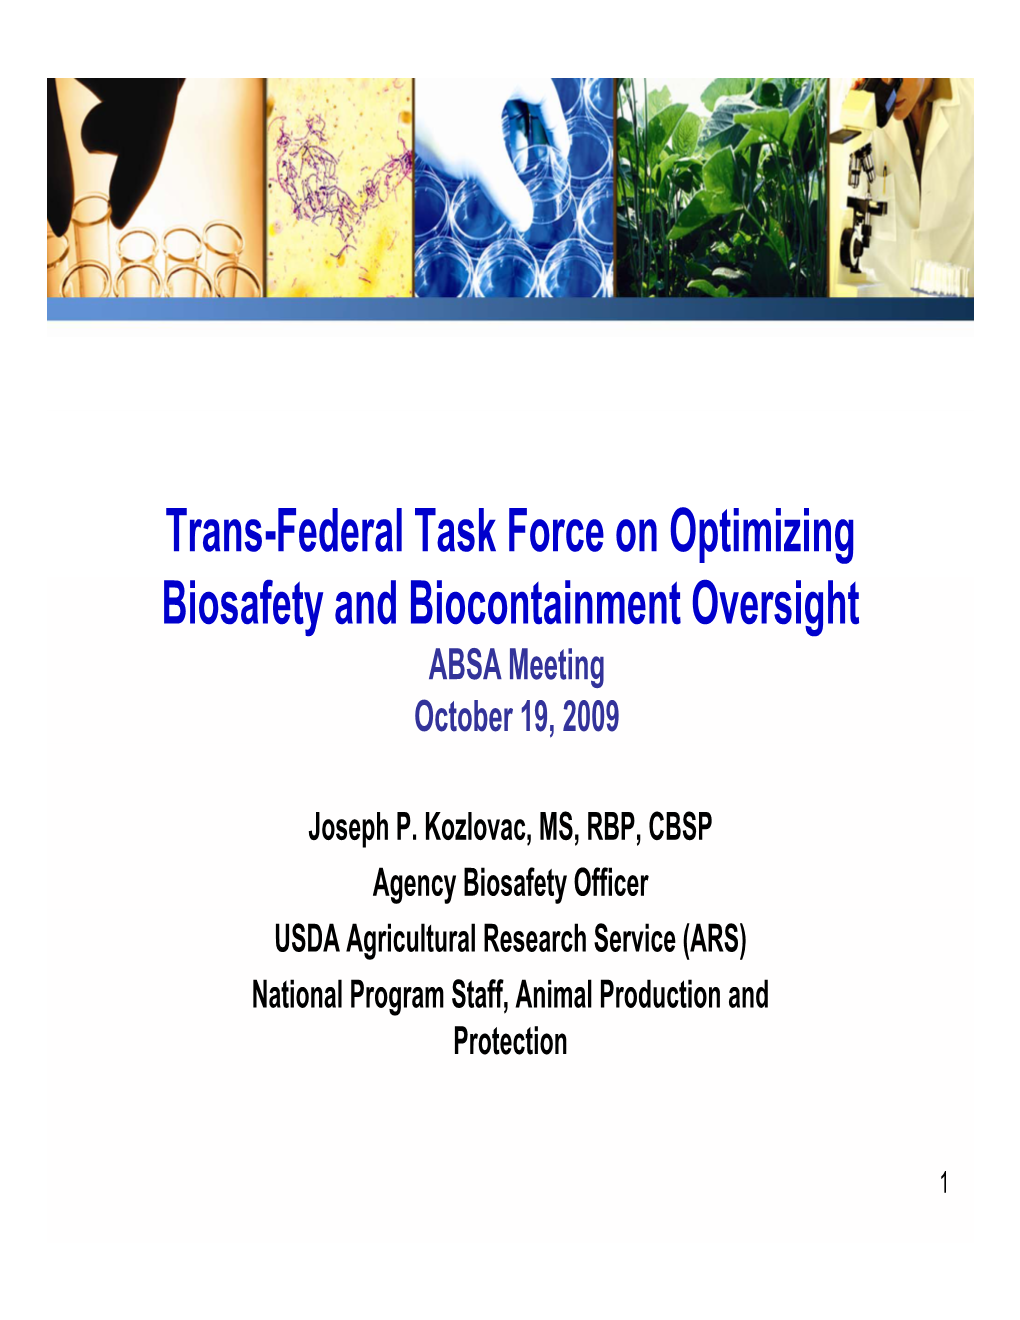 Trans-Federal Task Force on Optimizing Biosafety and Biocontainment Oversight ABSA Meeting October 19, 2009